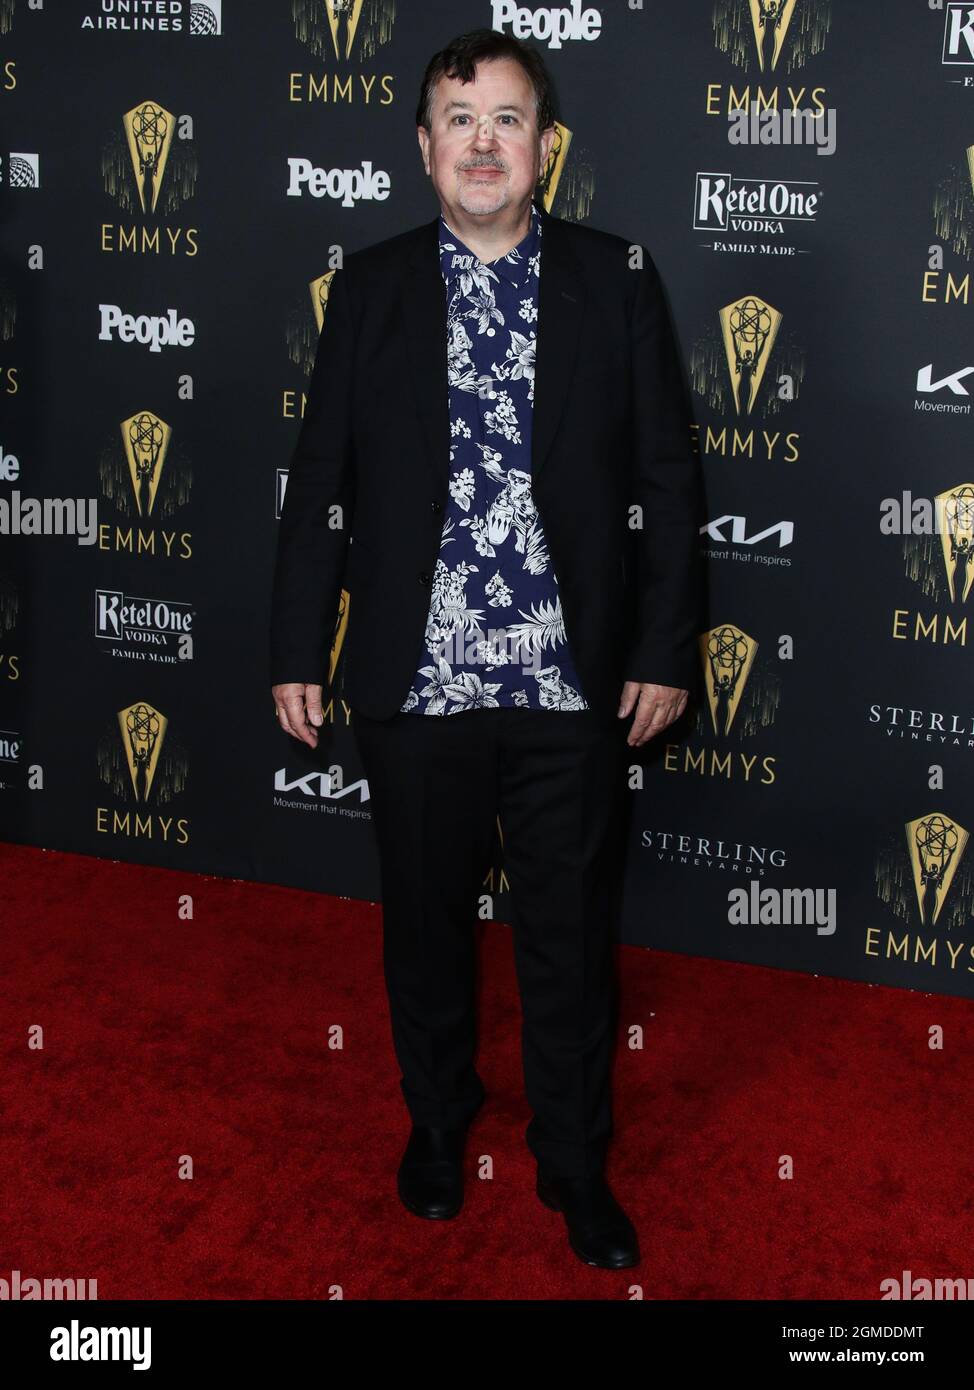 NORTH HOLLYWOOD, LOS ANGELES, CALIFORNIA, USA - SEPTEMBER 17: Actor Jeremy Swift arrives at the Television Academy's Reception To Honor 73rd Emmy Award Nominees held at The Academy of Television Arts and Sciences on September 17, 2021 in North Hollywood, Los Angeles, California, USA. (Photo by Xavier Collin/Image Press Agency) Stock Photo